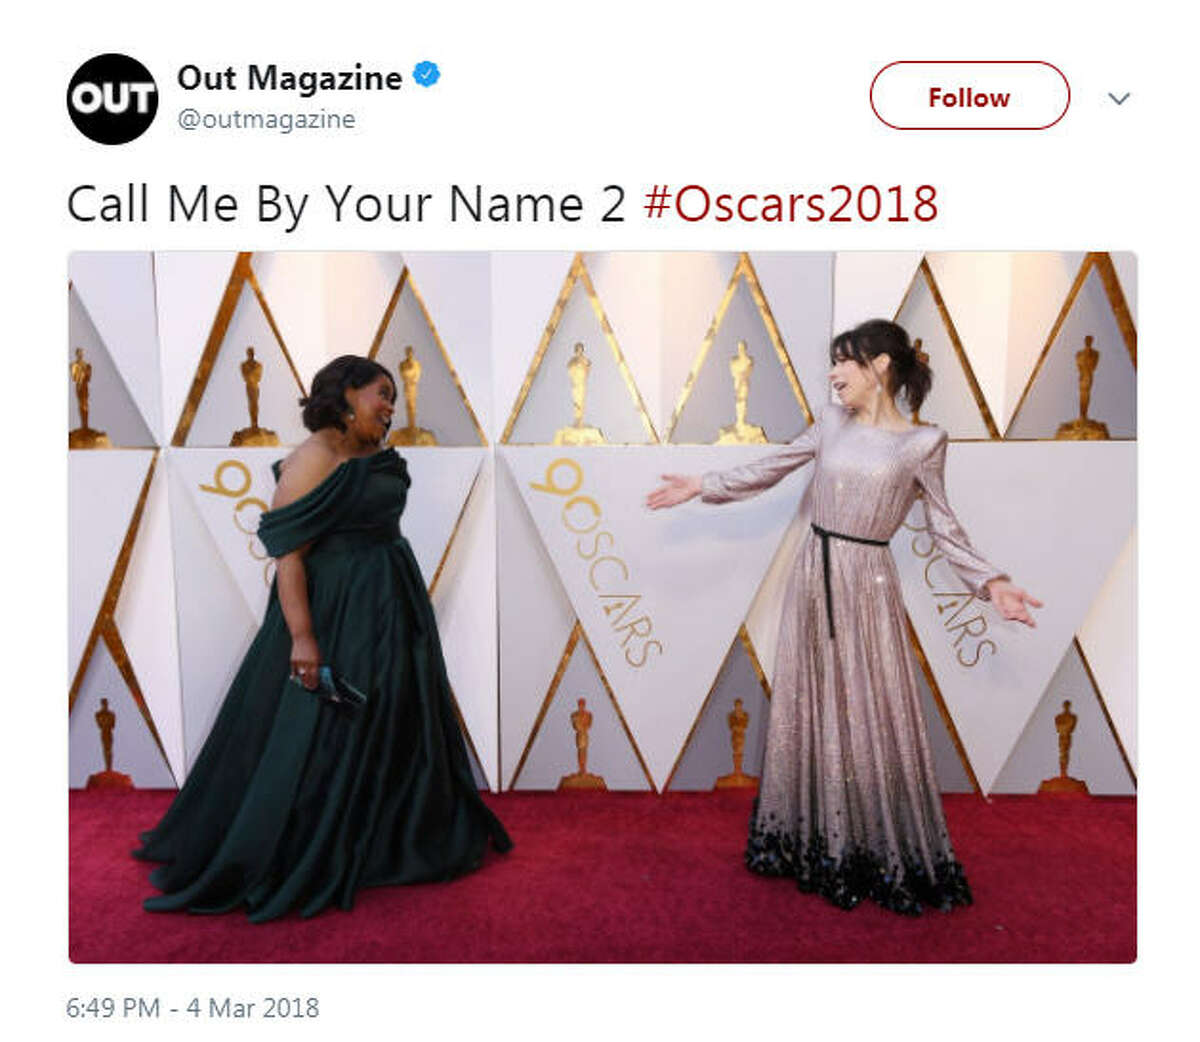 "Call Me By Your Name 2 #Oscars2018" Source: Twitter